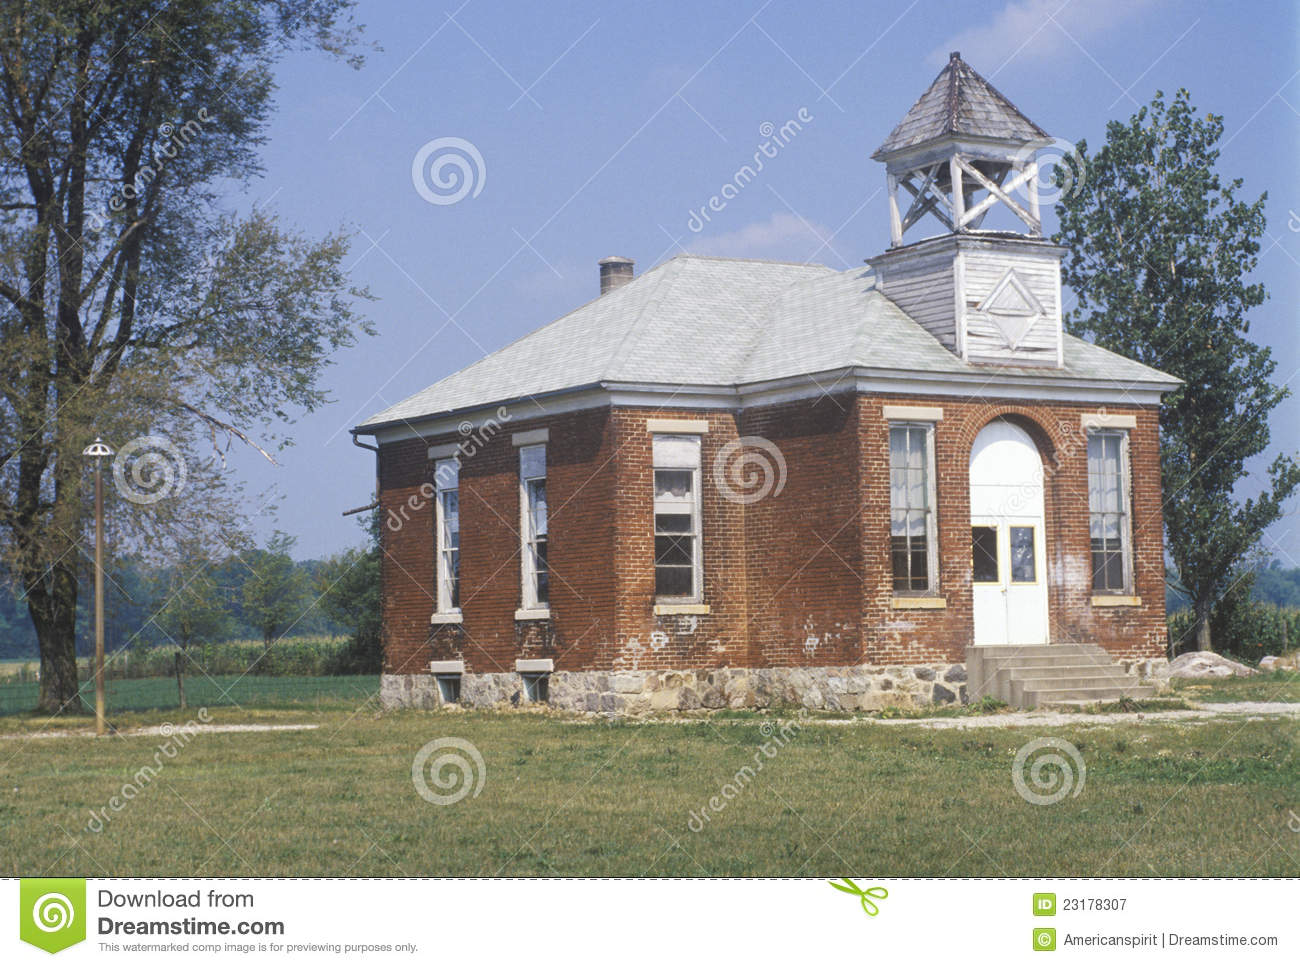 One Room Schoolhouse Royalty Free Stock Photography   Image  23178307